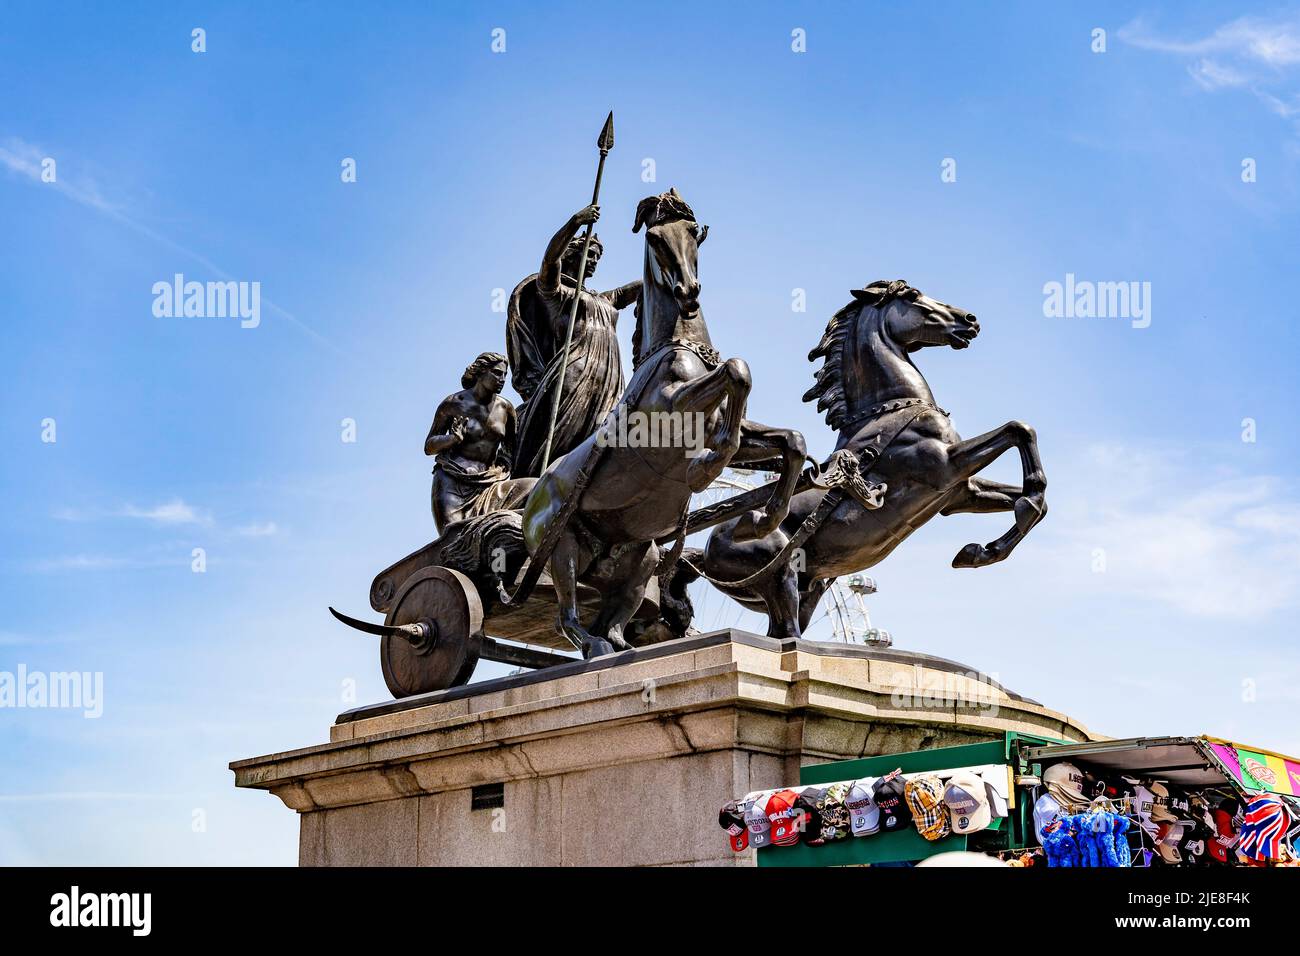 The statue of Boudicca and Her Daughters, queen of the British Iceni tribe, erected on the Victoria Embankment, Westminster bridge, London, UK Stock Photo